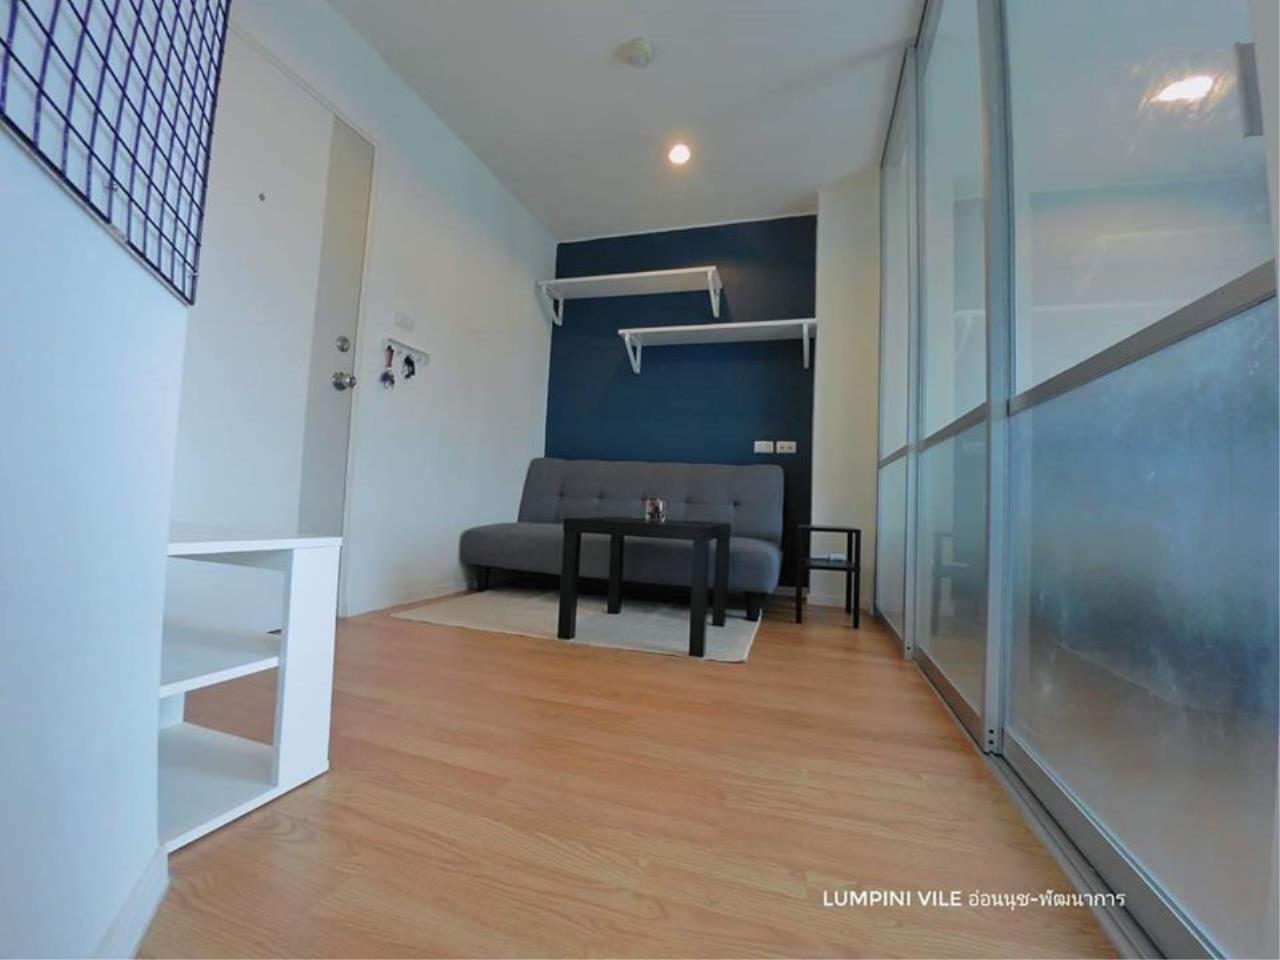 Agent Thawanrat Agency's Condo for rental LUMPINI VILLE ONNUT – PATTANAKARN Near Airport Link Hua Mak 1 bedroom,1 bathroom. size 23 sqm.Floor 8 th. fully furnished Ready to move in 2